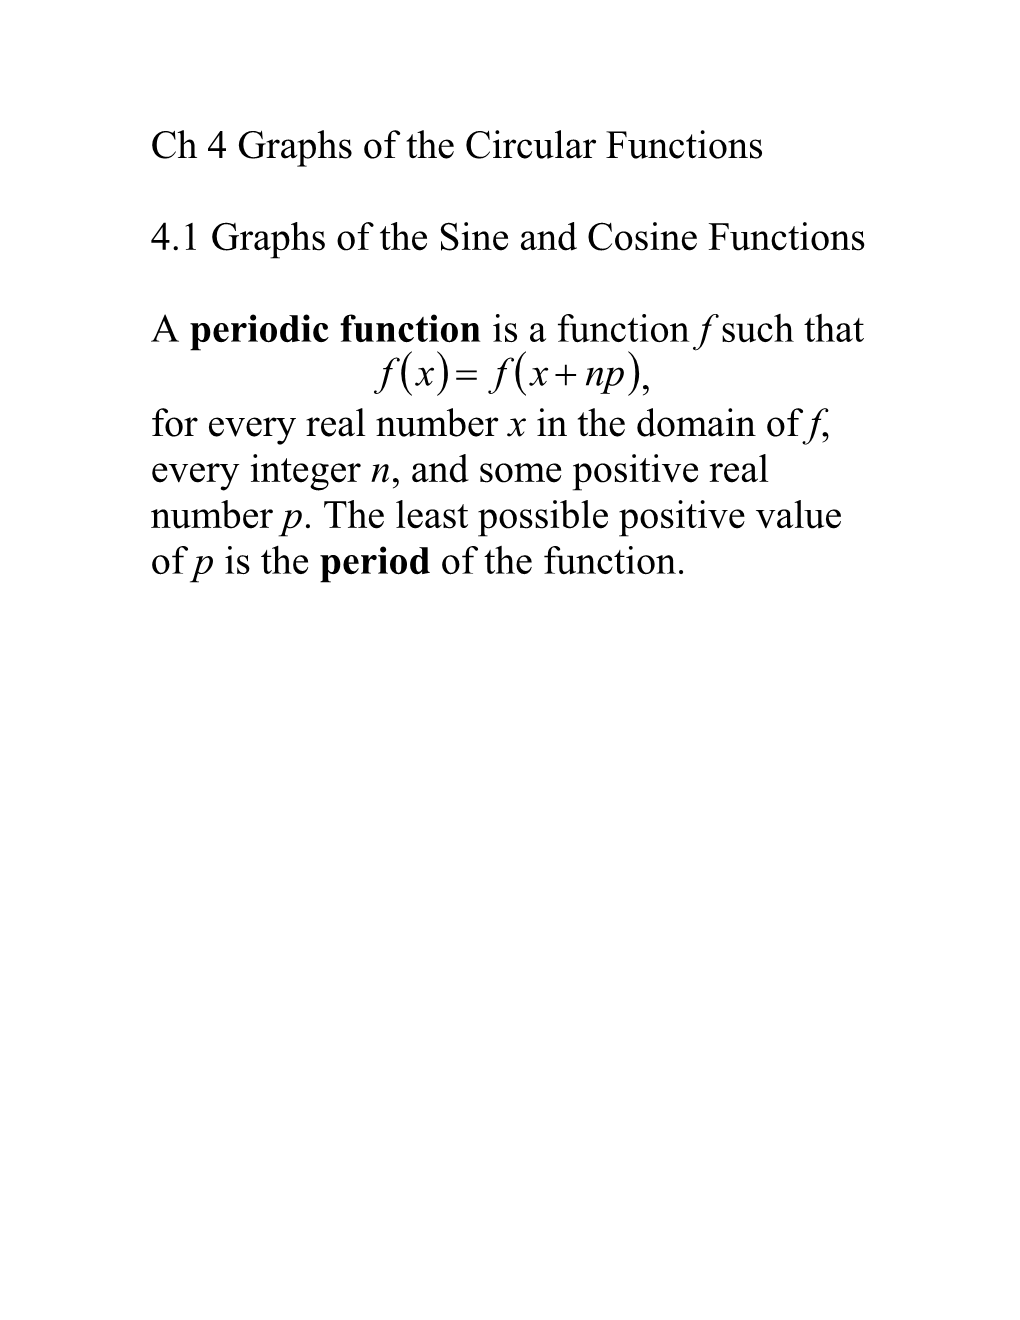 Ch 4 Graphs of the Circular Functions